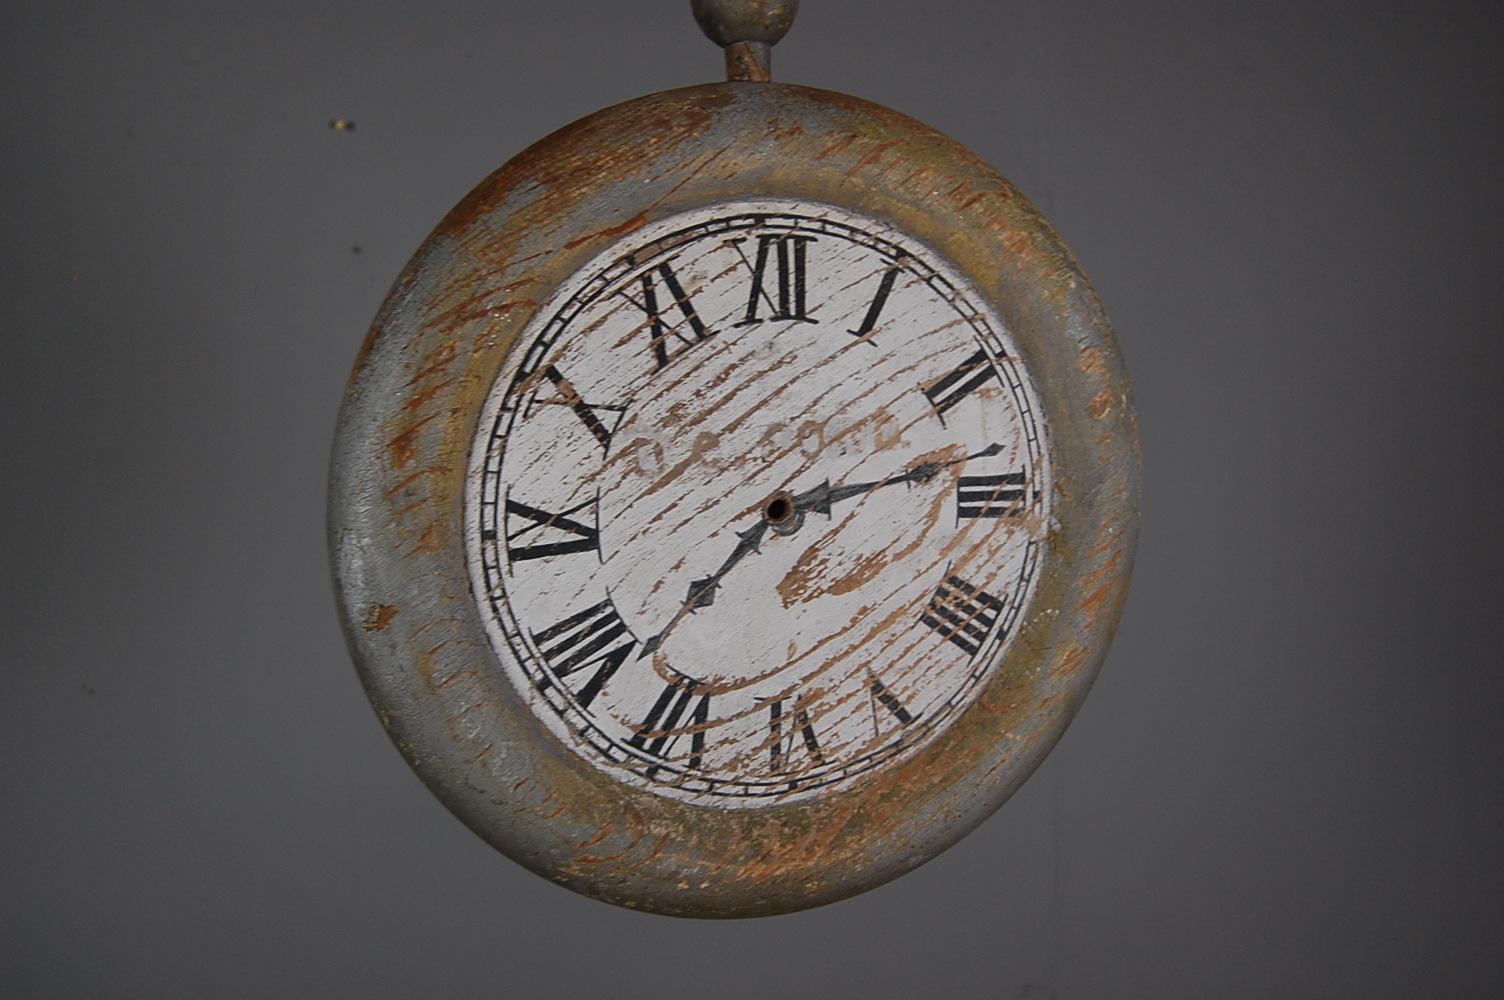 Late 19th or Early 20th century English watchmakers trade sign, would have hung to the exterior of a watchmakers store. Solid wood (pine) in the form of a pocket watch with heavily weathered crusty painted surface, remnant gilding with heavy